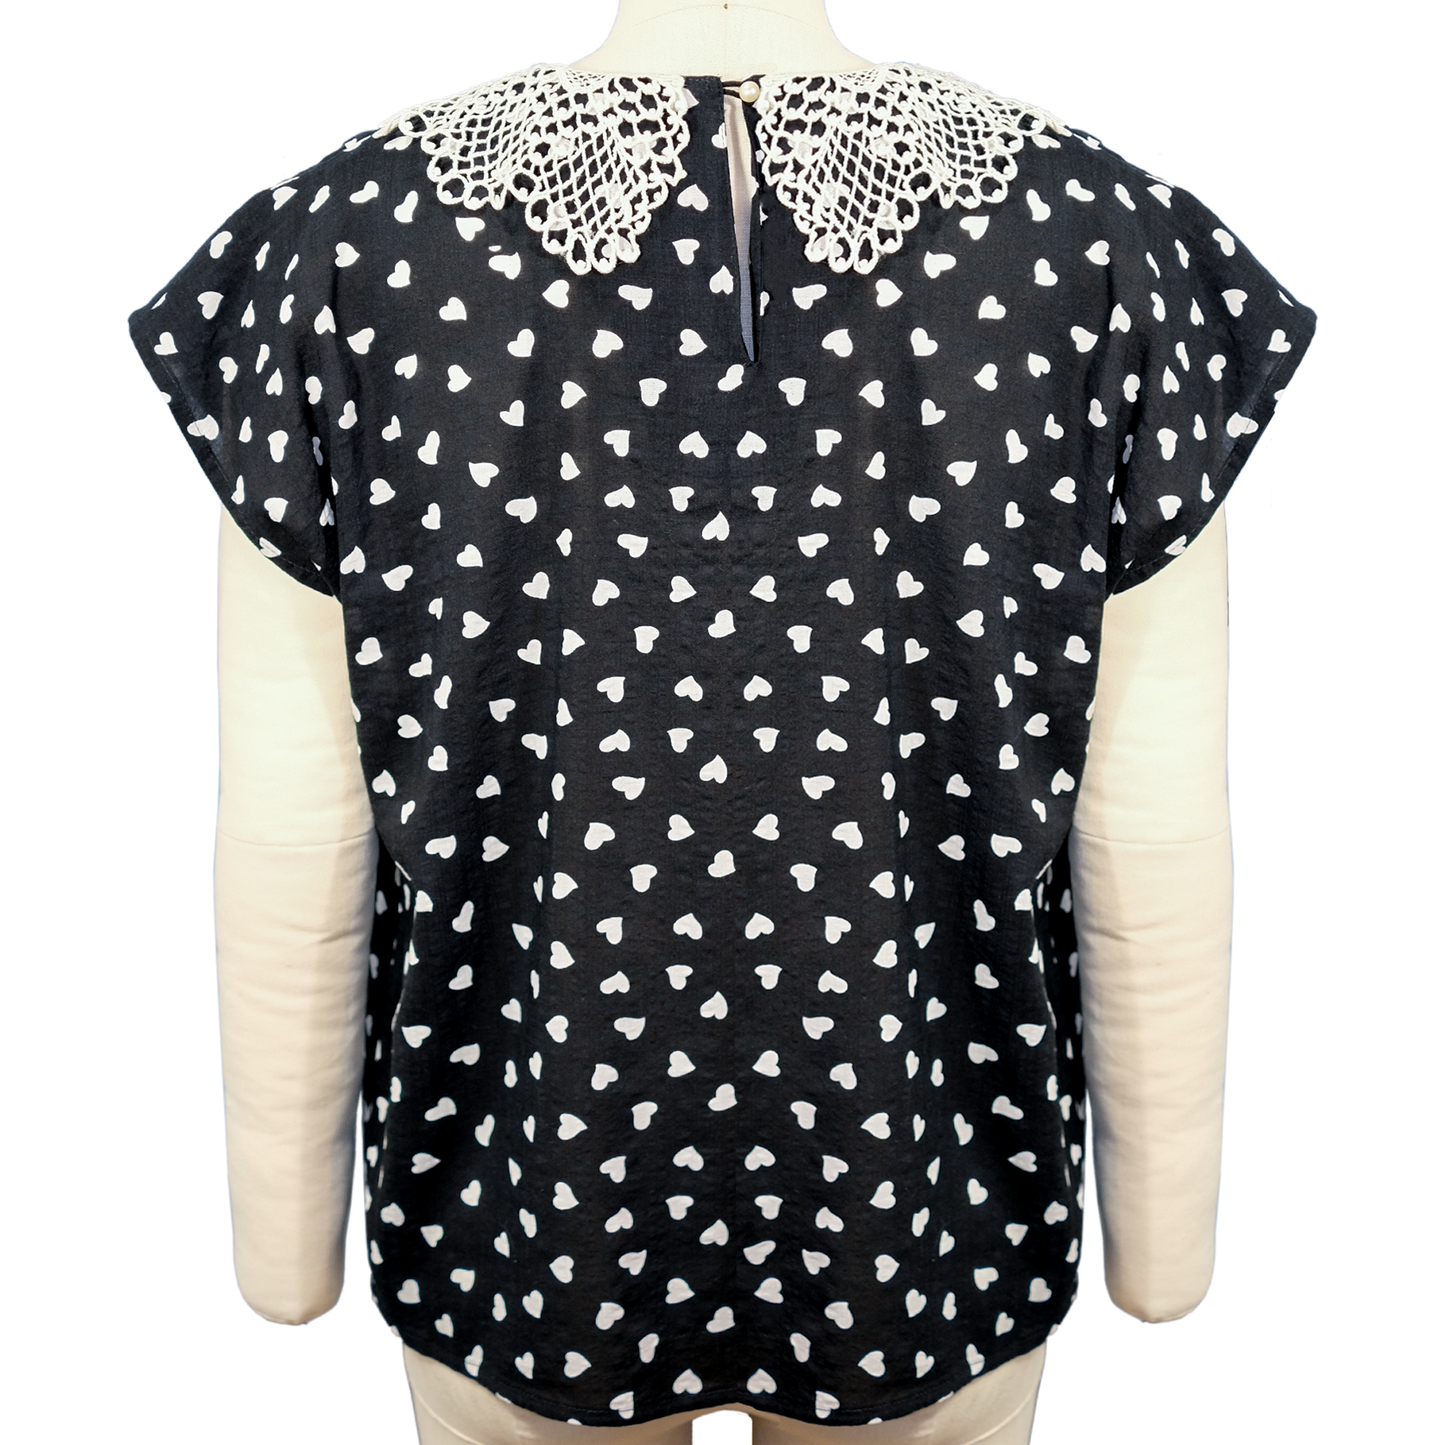 Ruth - Heart Print Cotton Blouse with Up-cycled Collar - Size Medium/Large